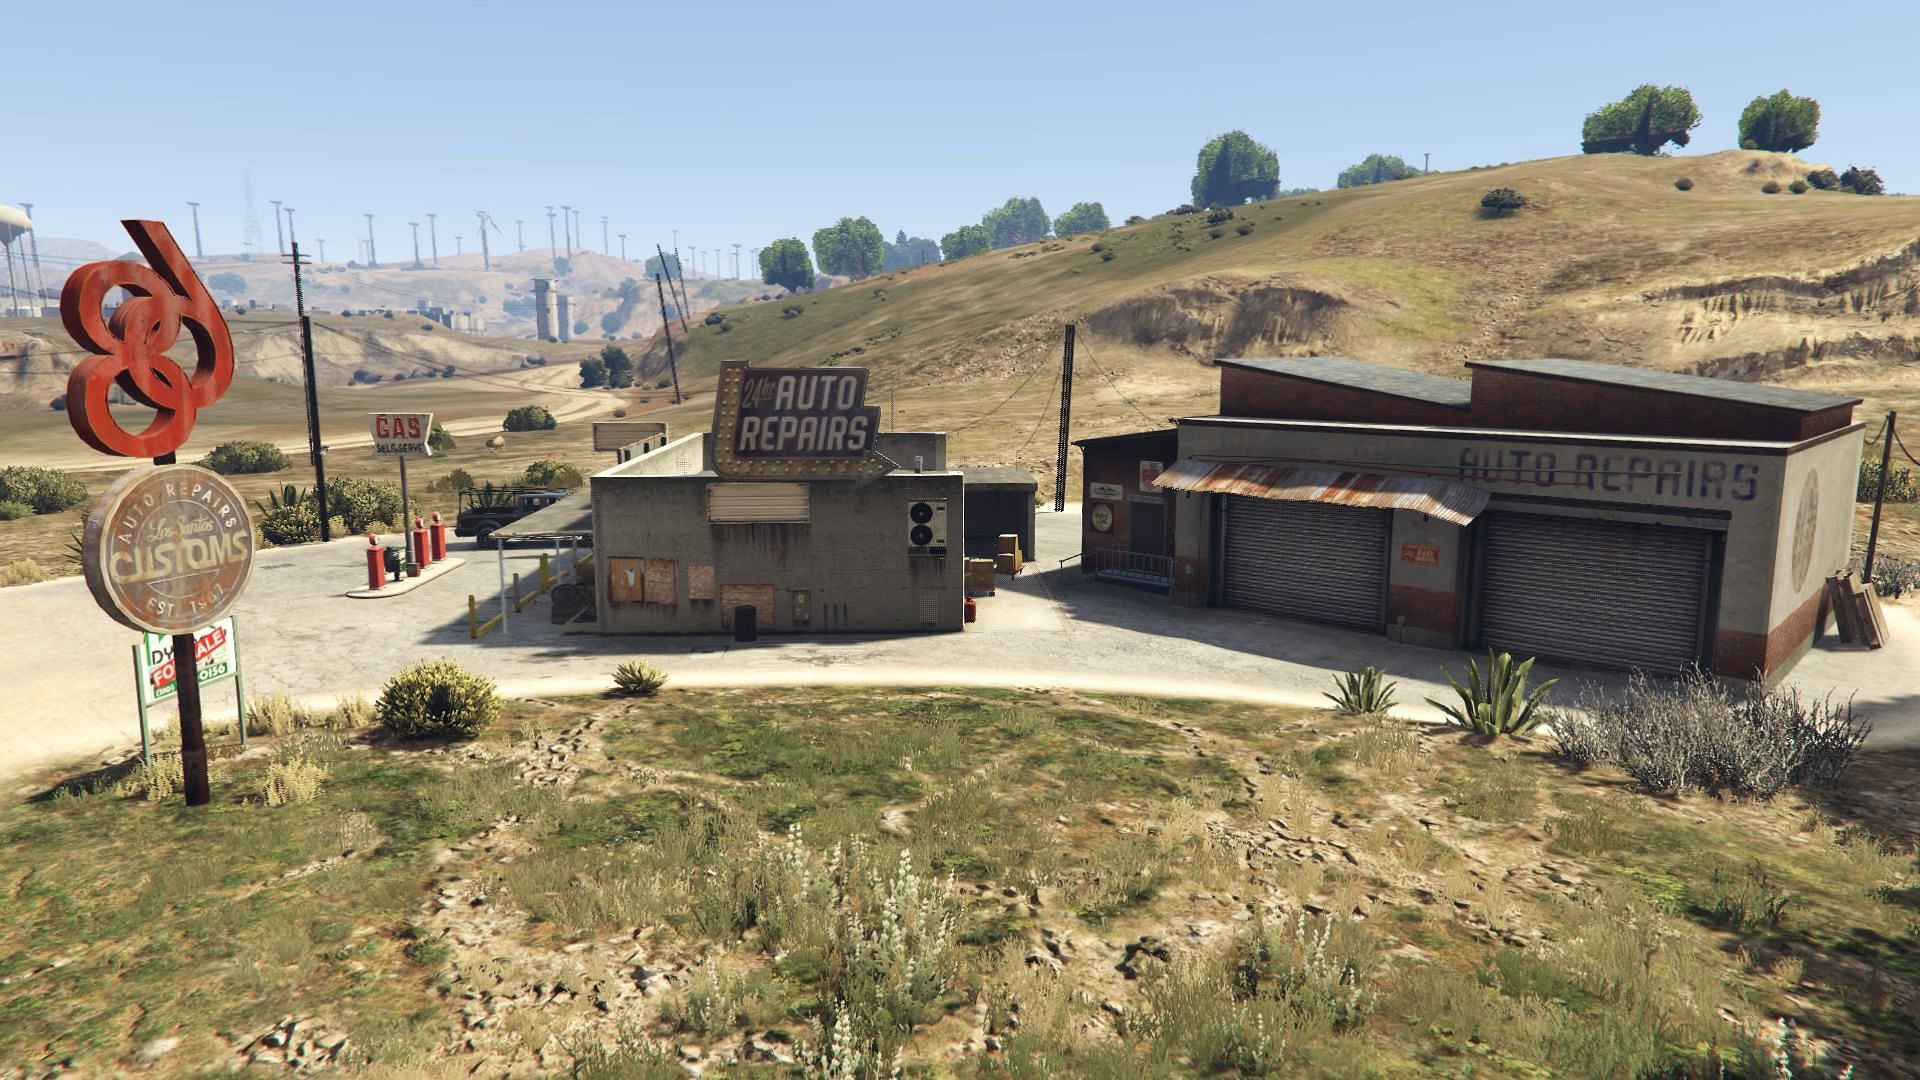 The Harmong branch, as it appears in GTA 5 (Image via Rockstar Games)